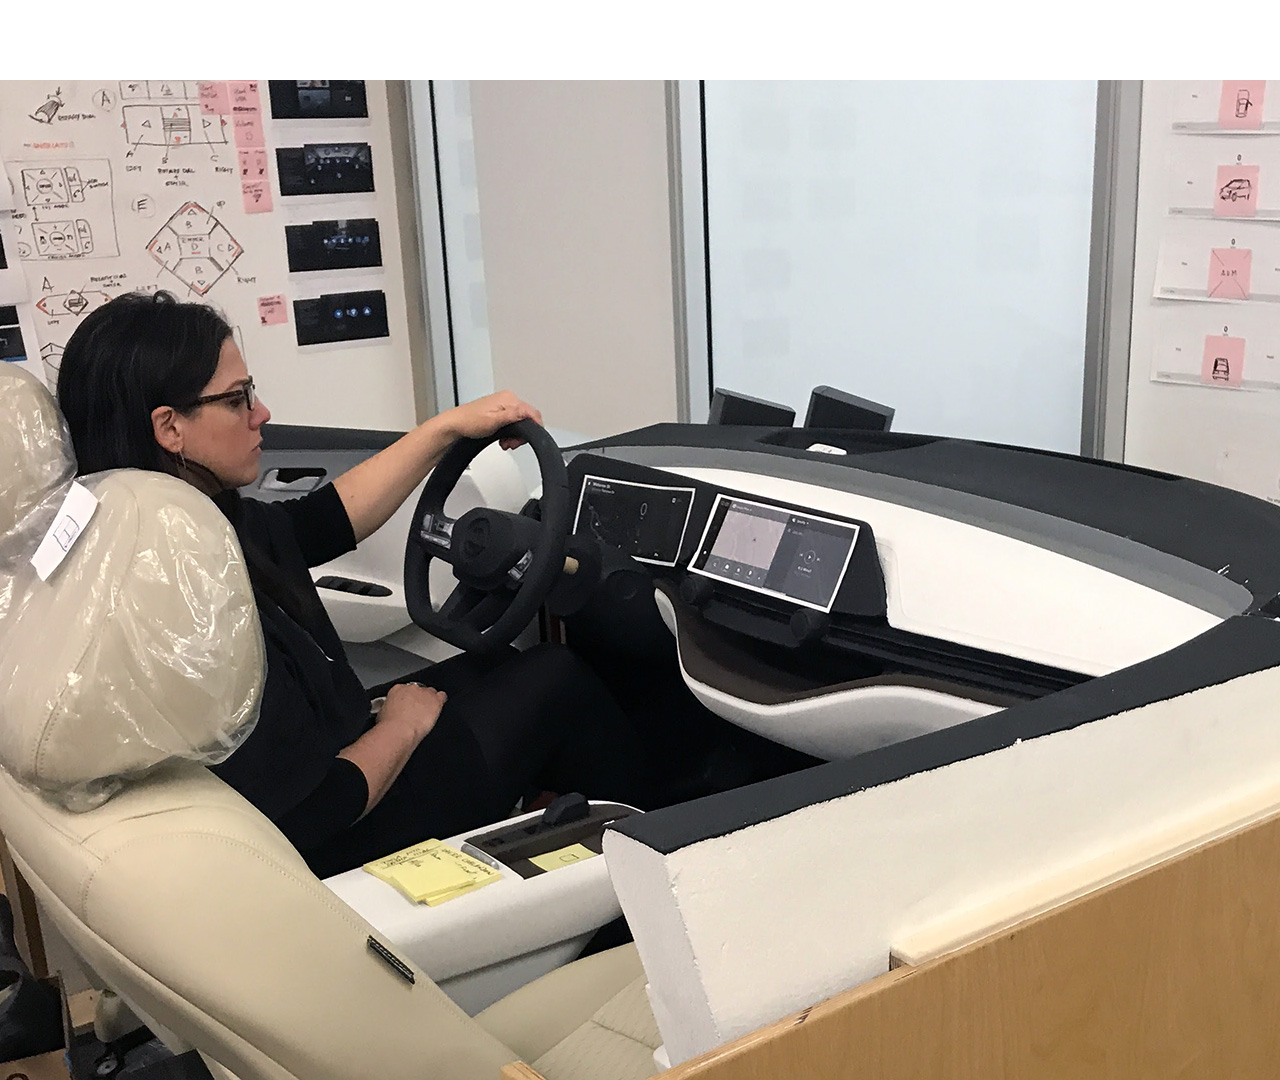 Low-fidelity in-vehicle dashboard prototyping